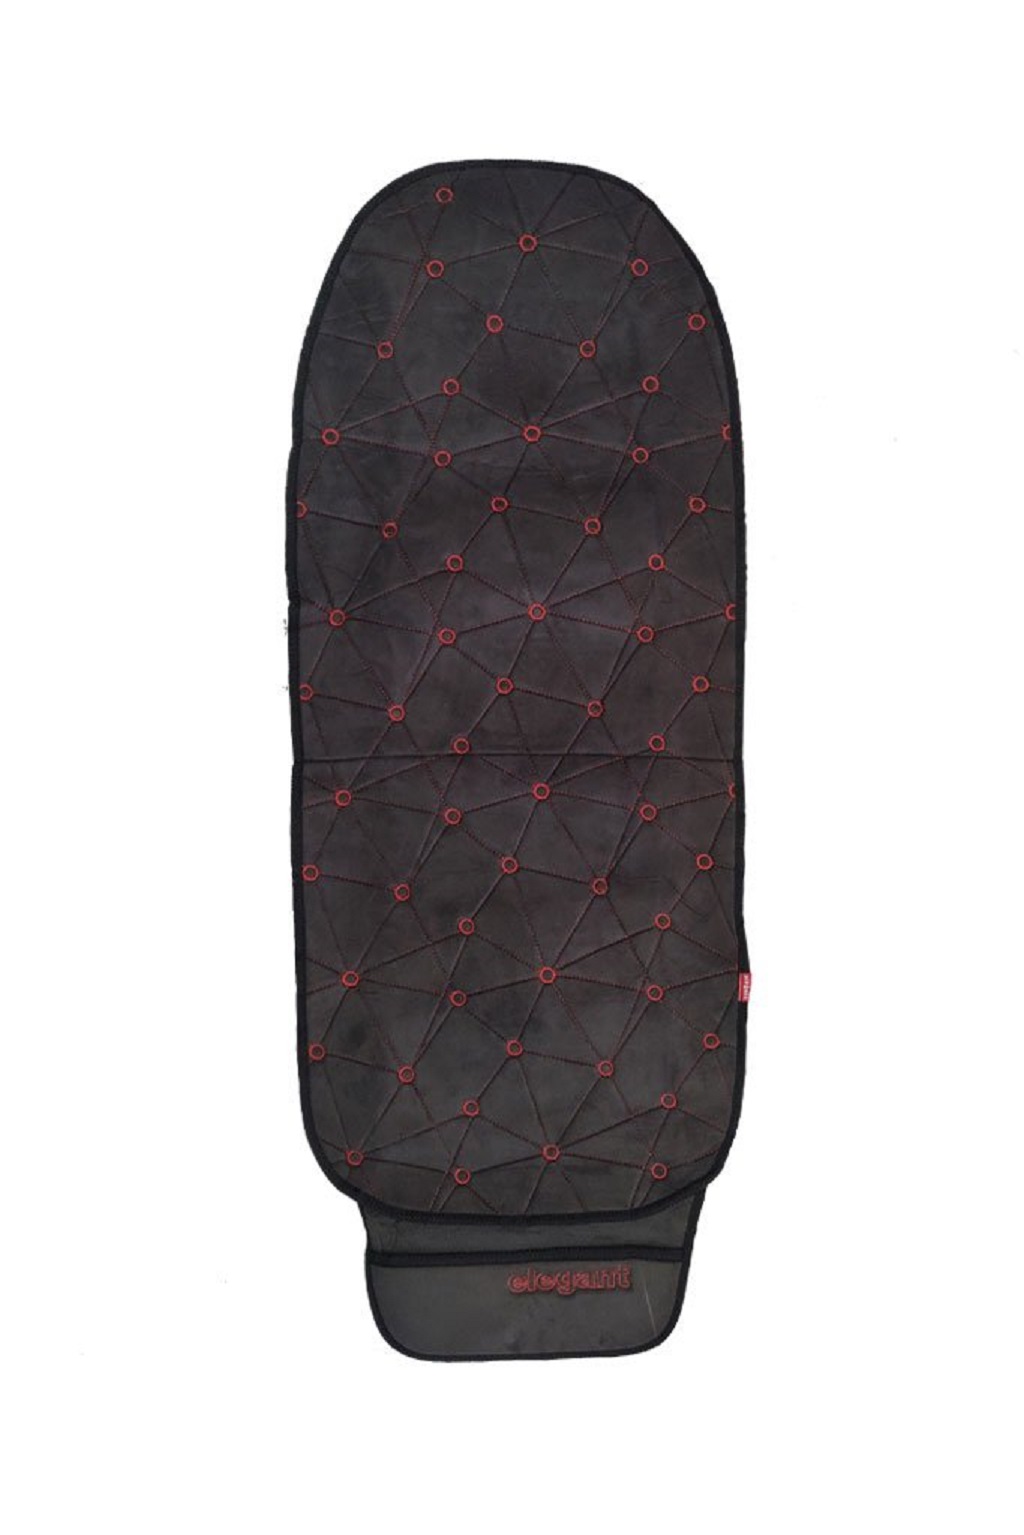 Elegant Space CoolPad Full Car Seat Cushion Black and Red (For Driver)